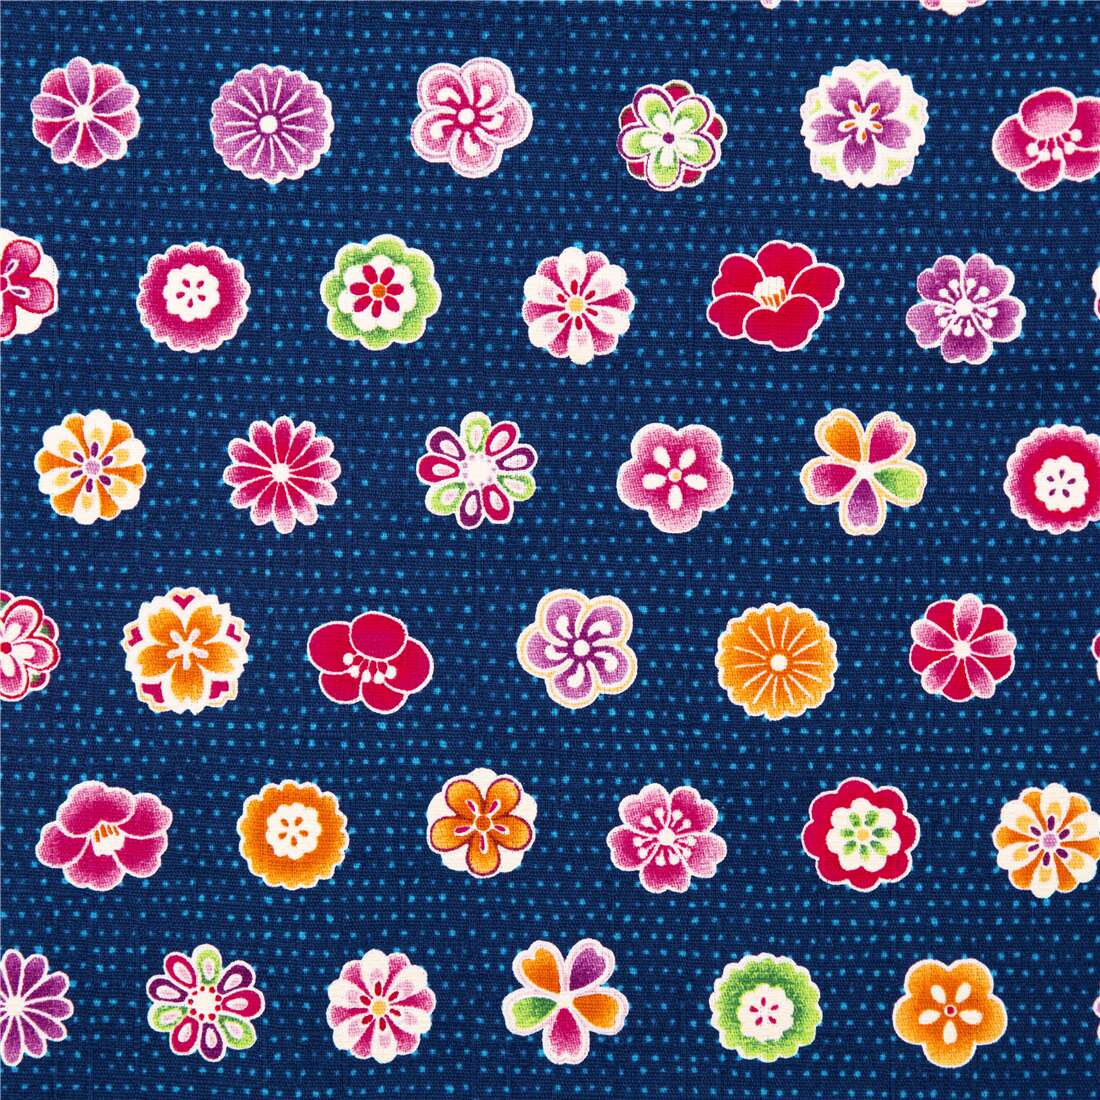 dotted blue dobby fabric with brightly coloured rows of flowers Cosmo -  modeS4u